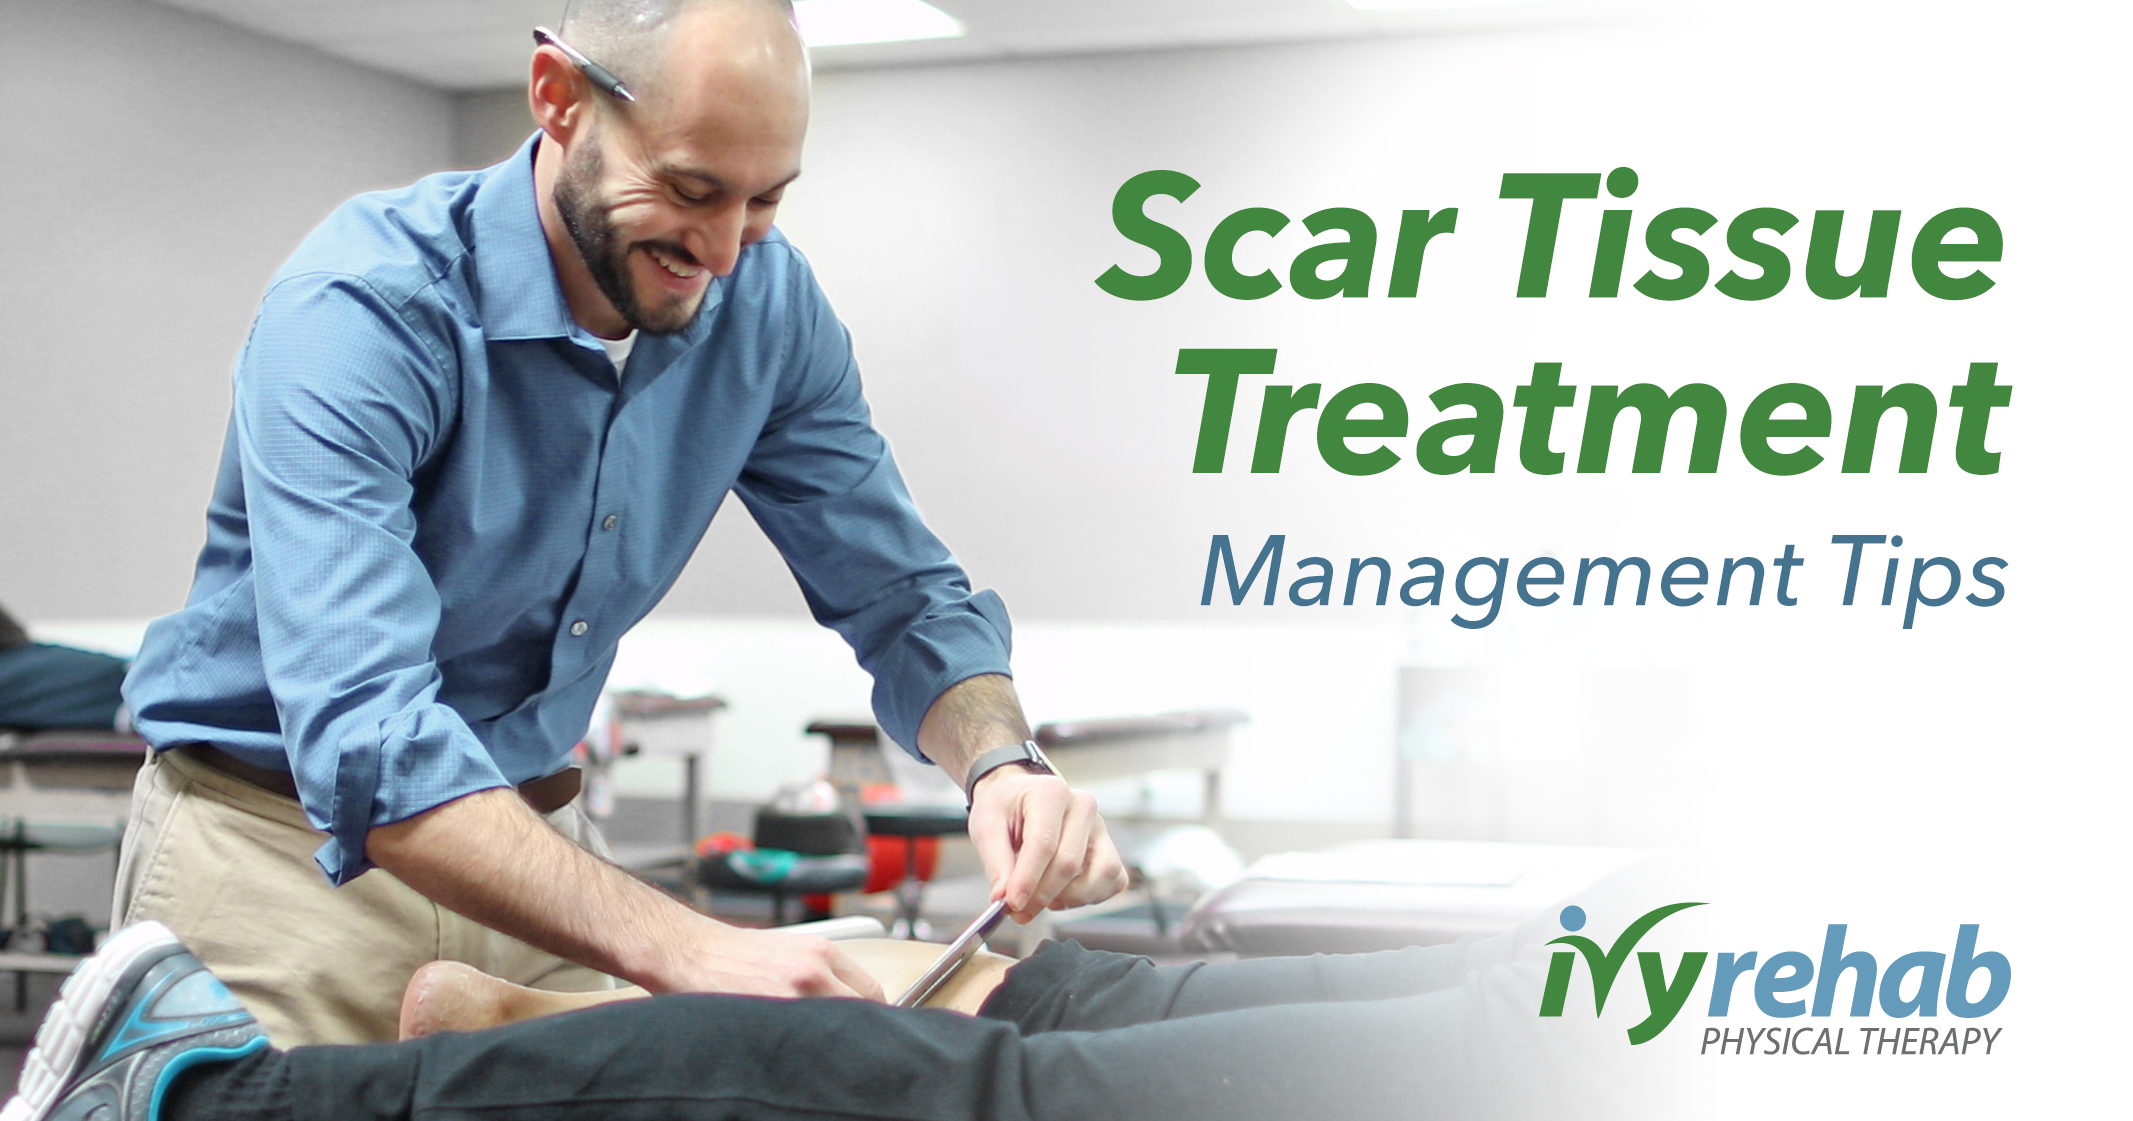 Scar tissue treatment and physical therapy